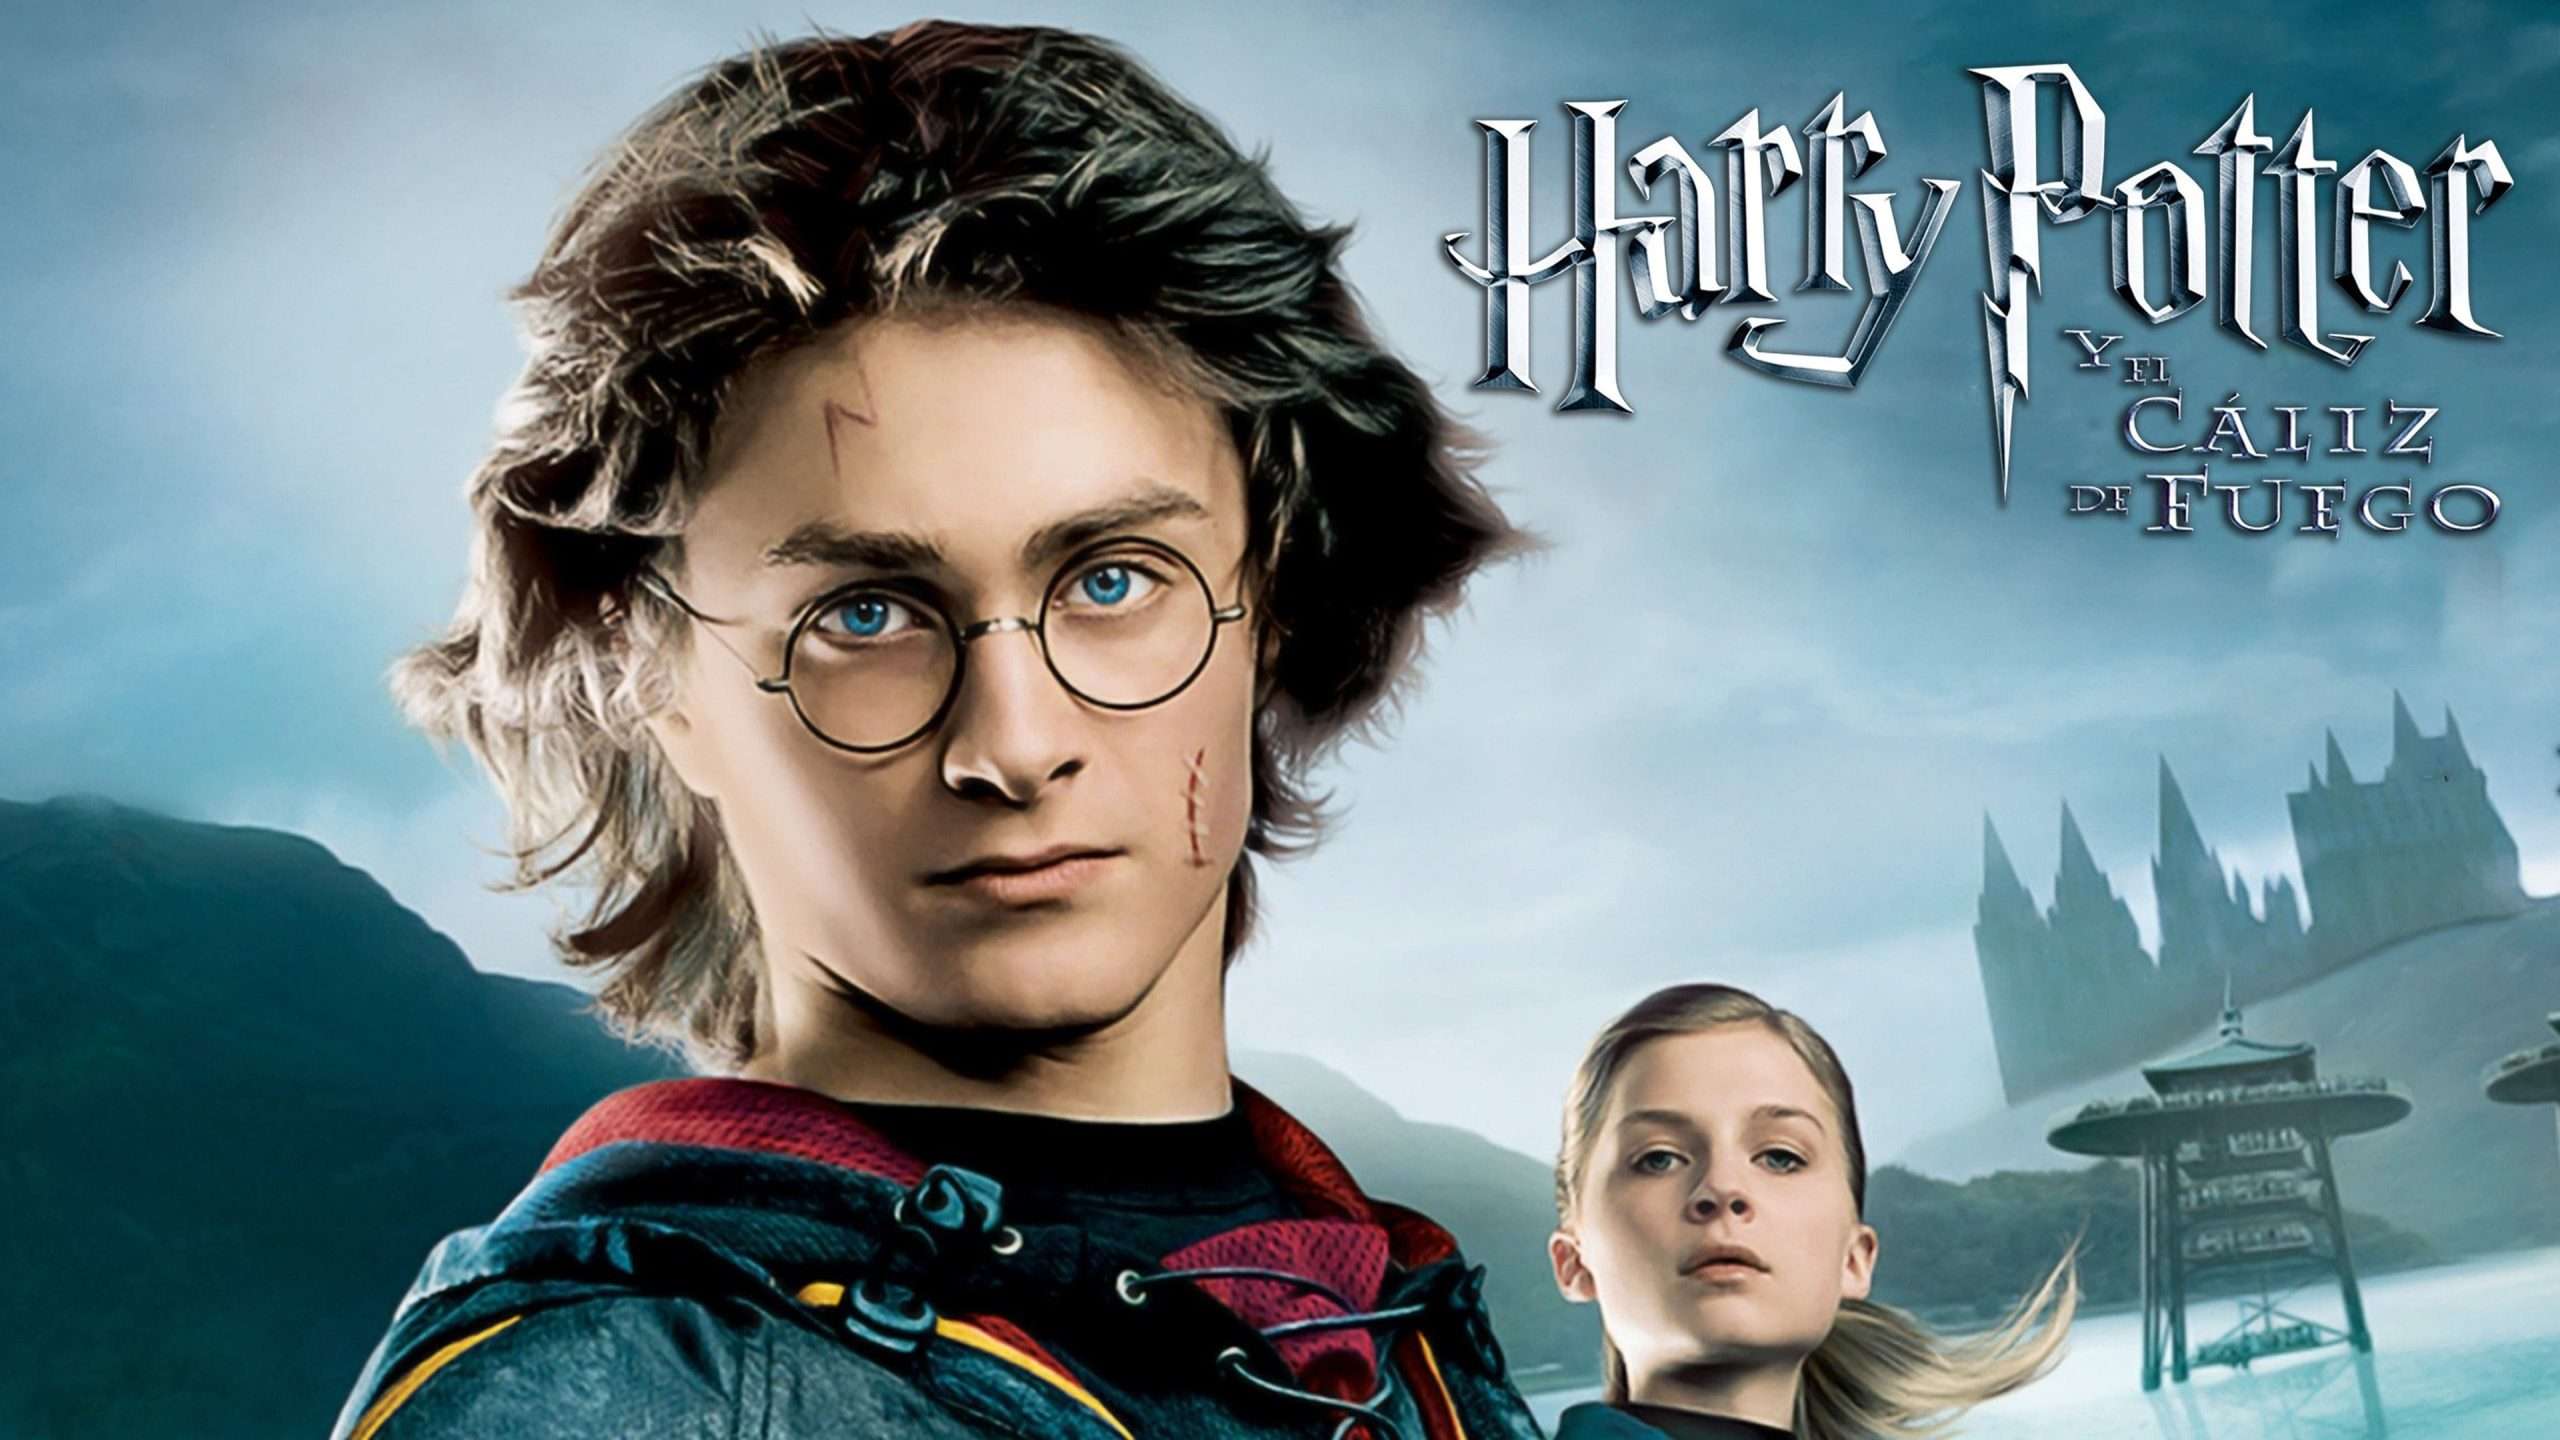 Watch Harry Potter and the Goblet of Fire (2005) Full Movie Online Free ...